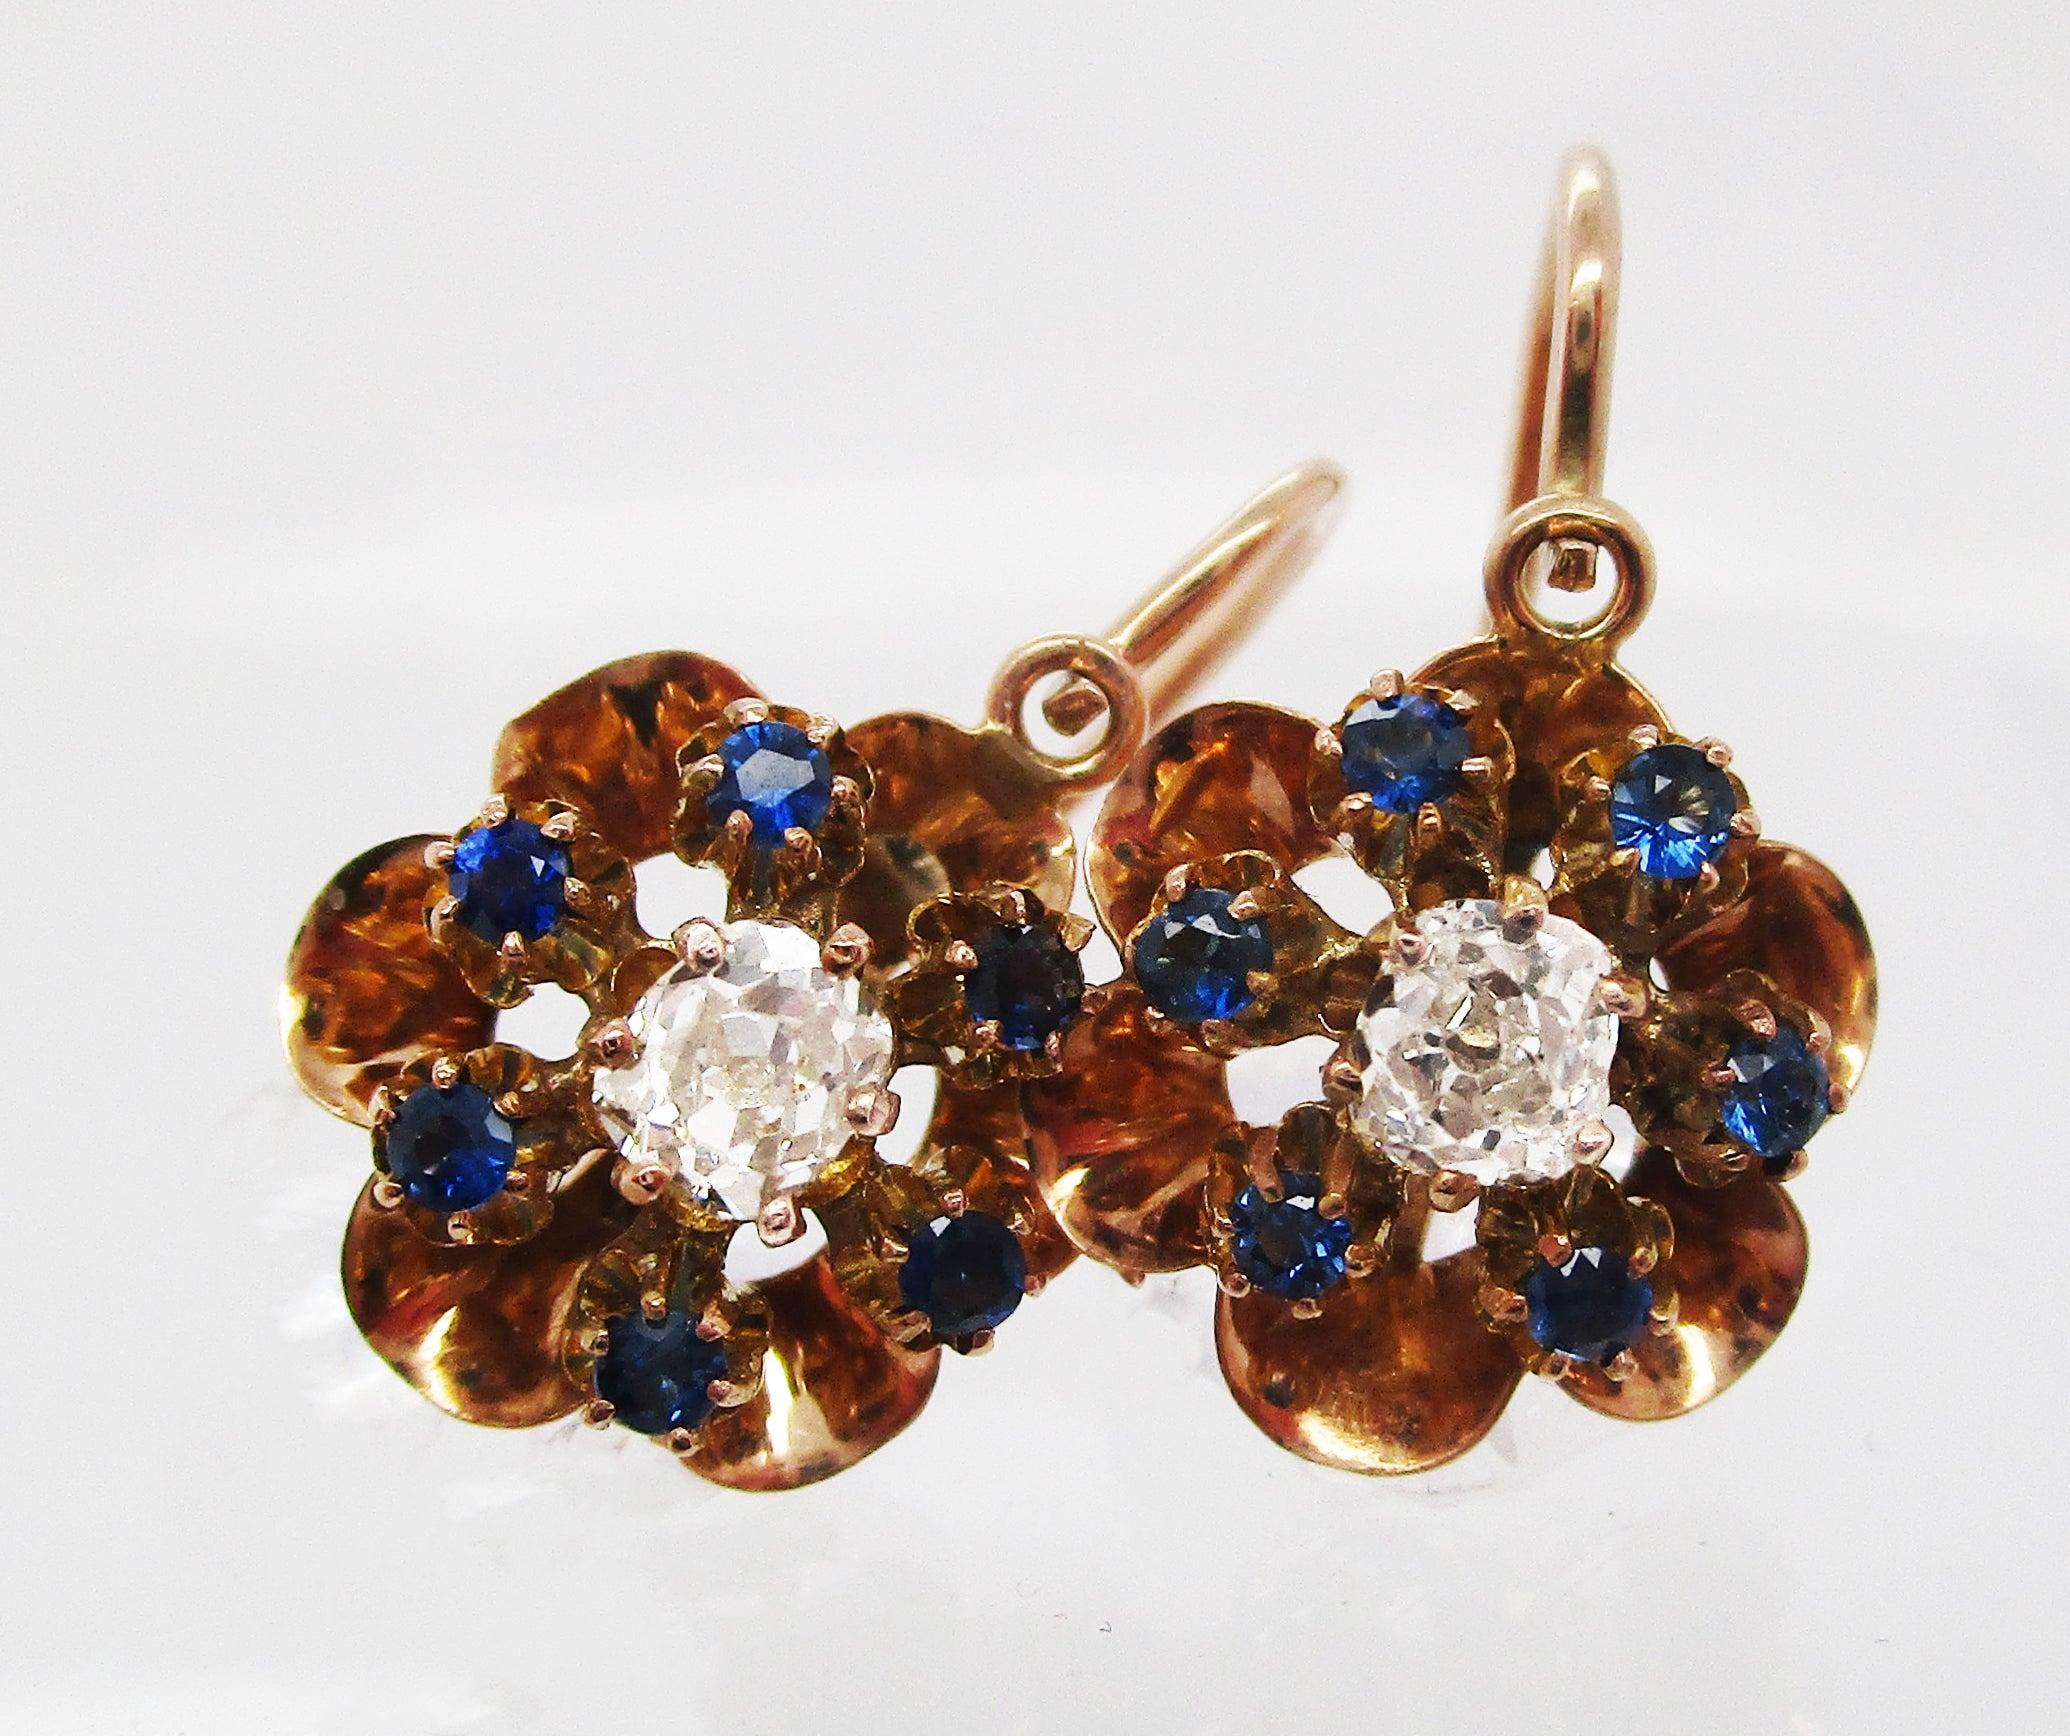 This is a stunning pair of Victorian drop earrings in 14k rose gold boasting gorgeous mine cut diamond centers framed by brilliant blue sapphires set into a beautiful rose gold flower setting! The lovely design of the earrings features a blue